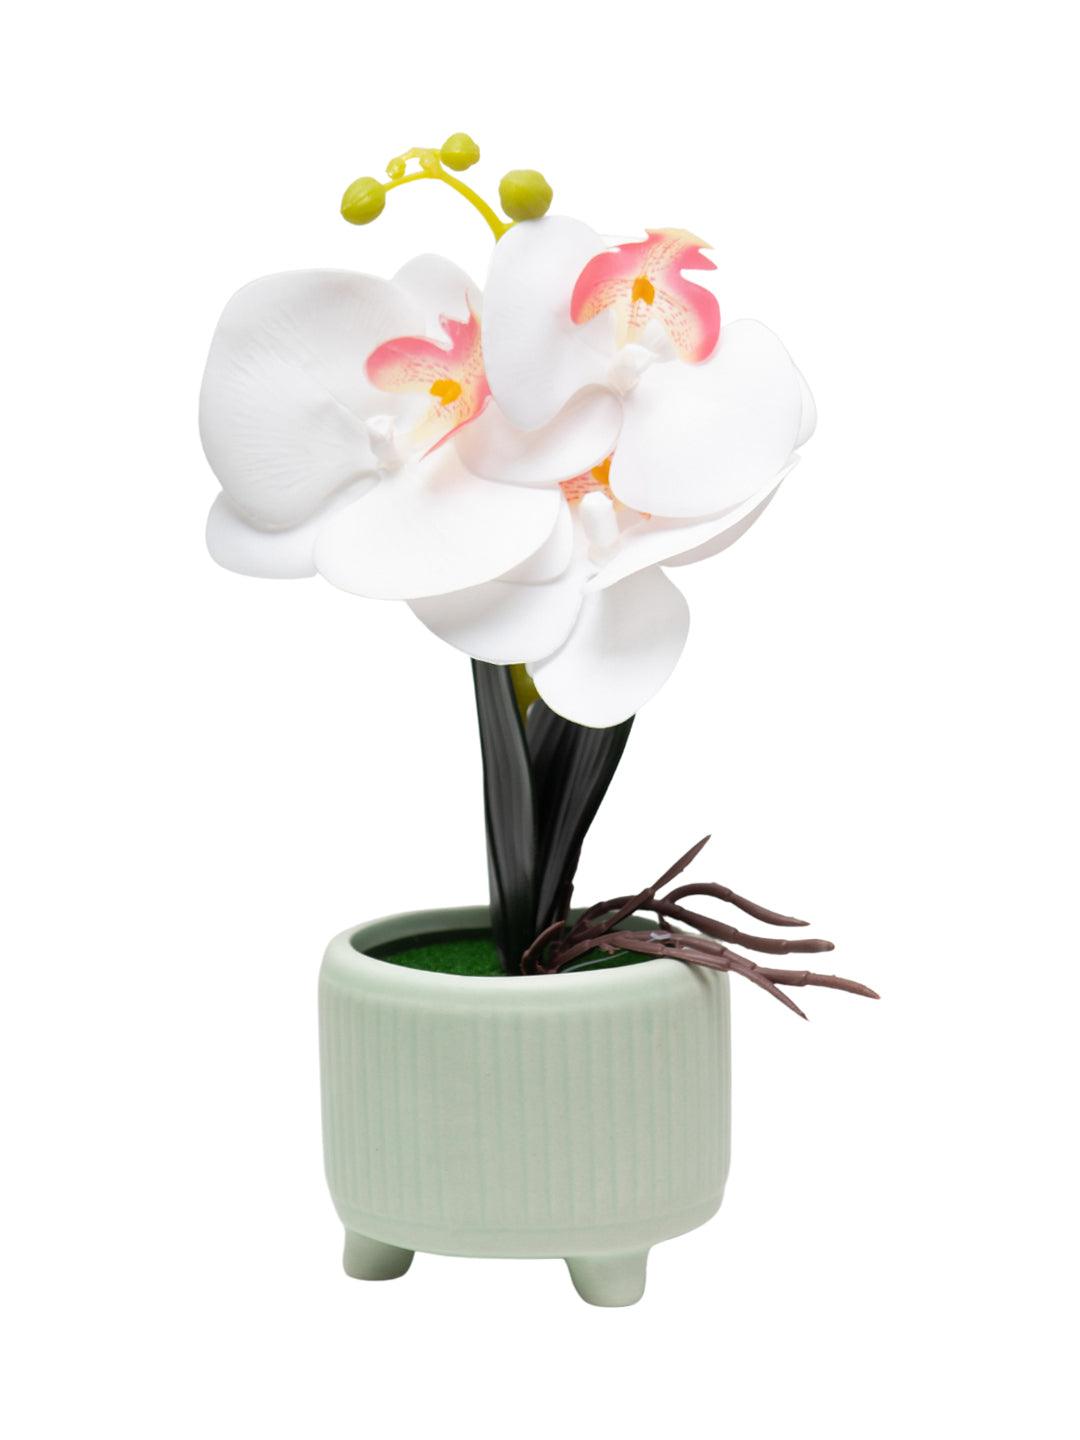 White Orchid Flowers With White Tumbler Pot - MARKET 99